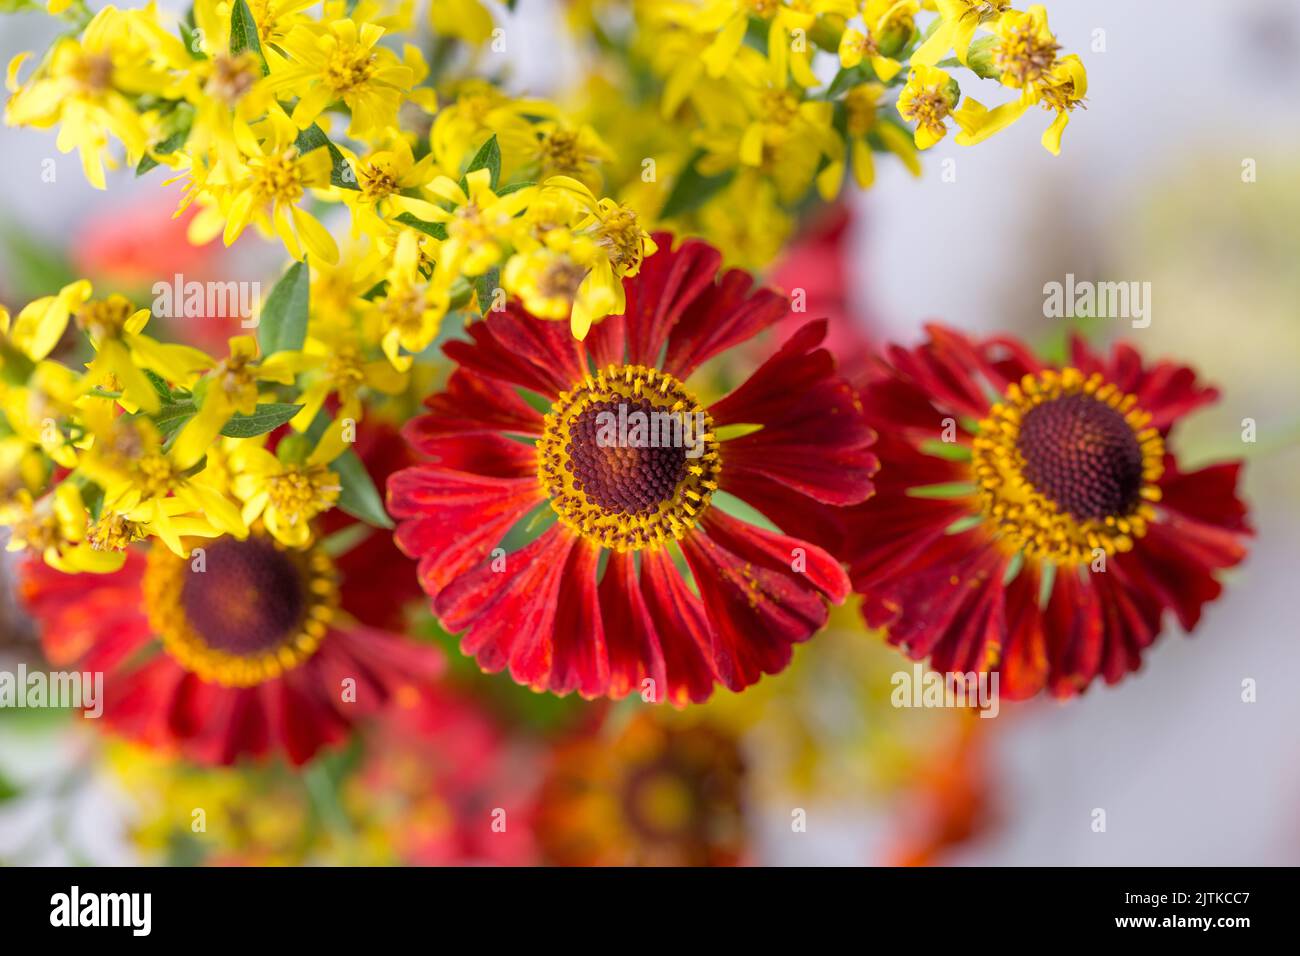 Close-up autumn bouquet of small yellow flowers and red helenium flowers Stock Photo